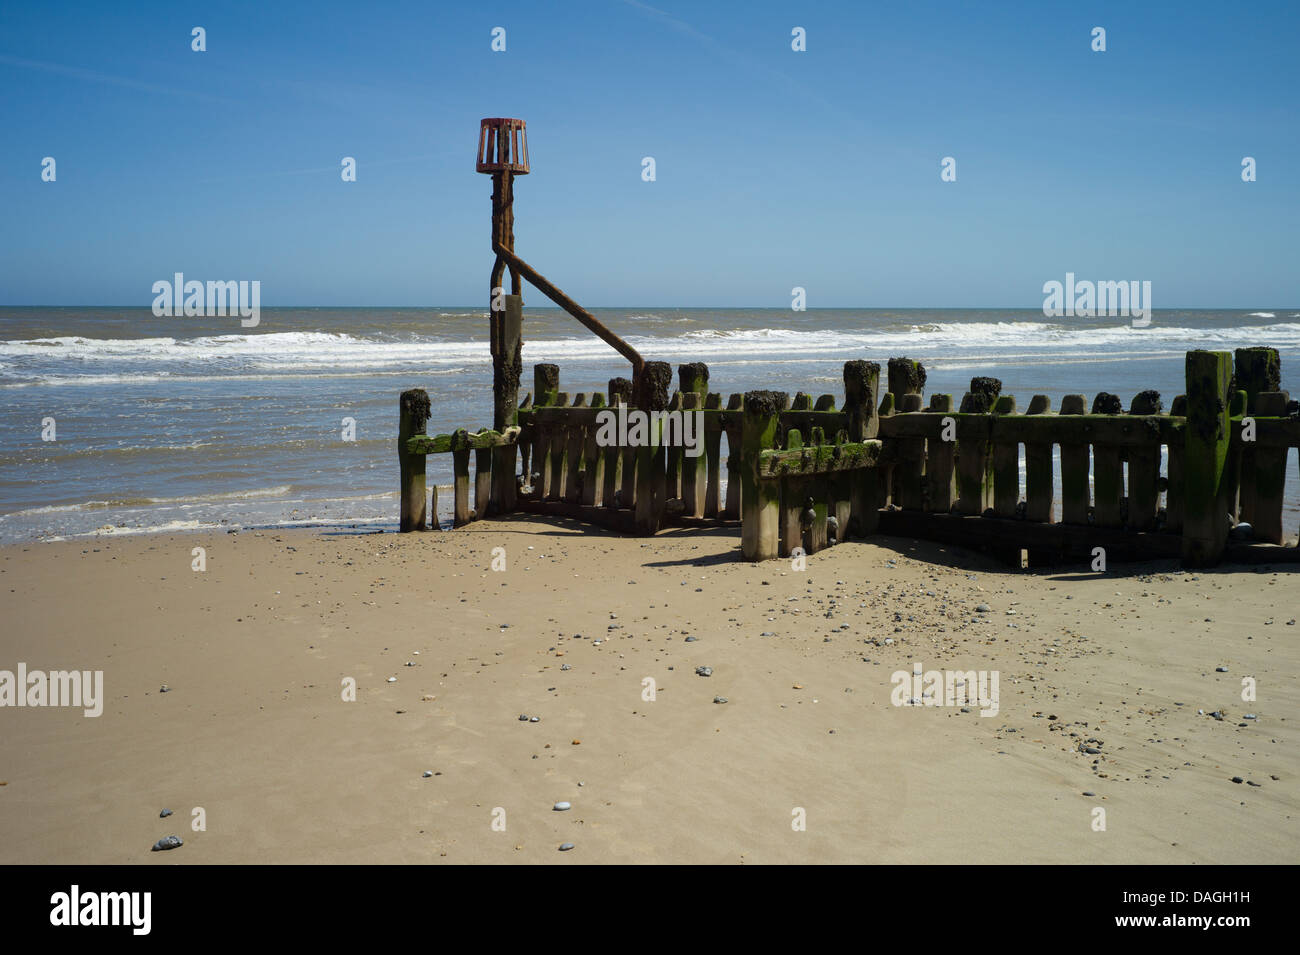 Mundesley seaside town on the North Norfolk Coast, England, June 2013. Stock Photo